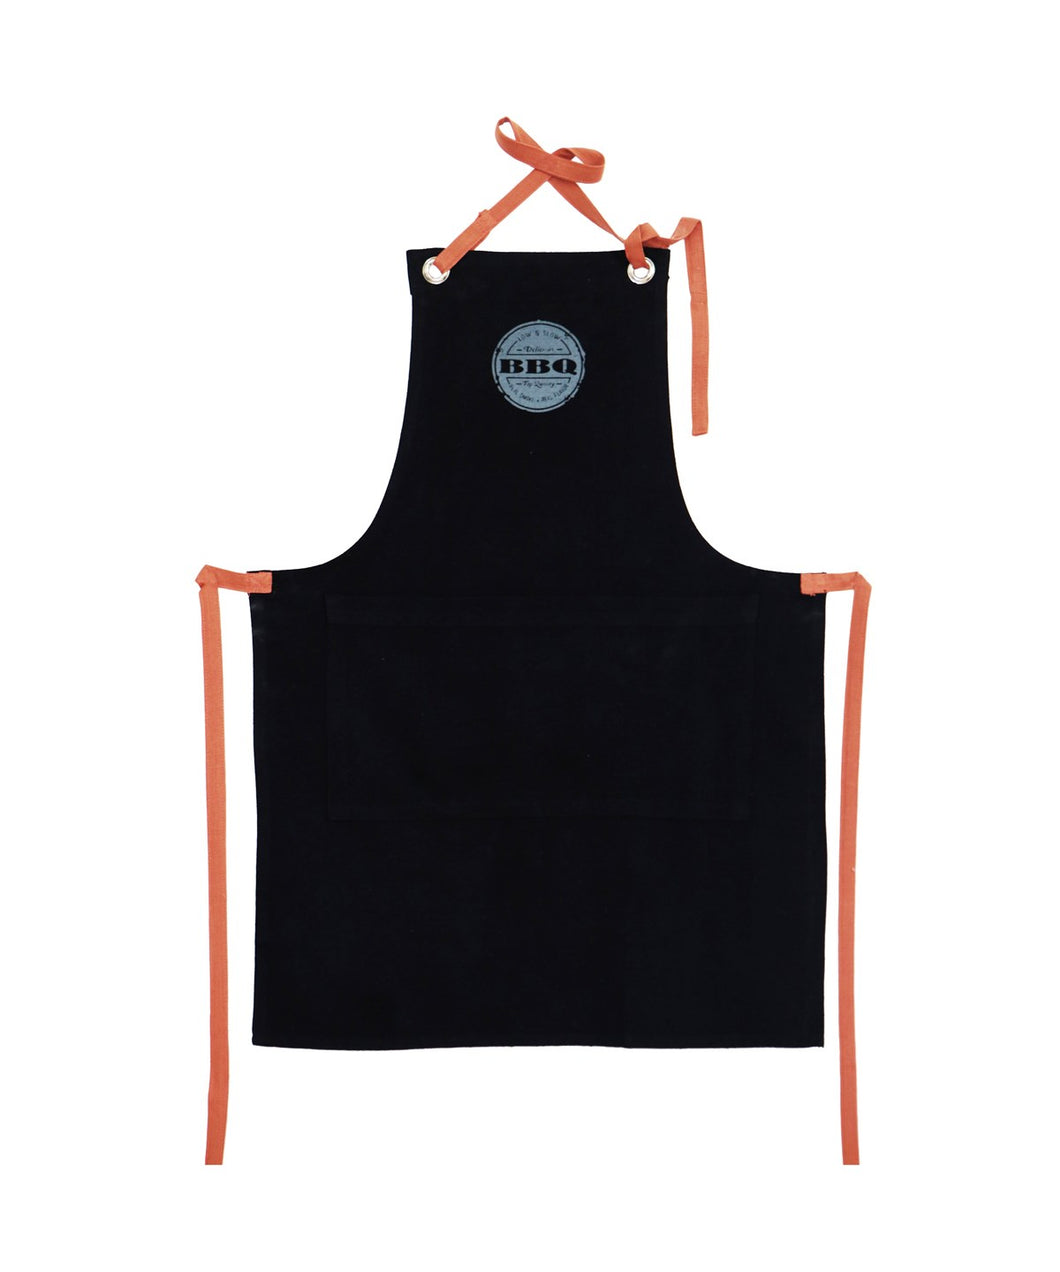 Get ready for a summer of bbq fun!  This Classic Black BBQ Apron is great for all grilling enthusiasts and grill chefs alike. Pair it with our bbq mits, towel and grill press for a great Father's Day, Host or Just Because gift.  Size:  34